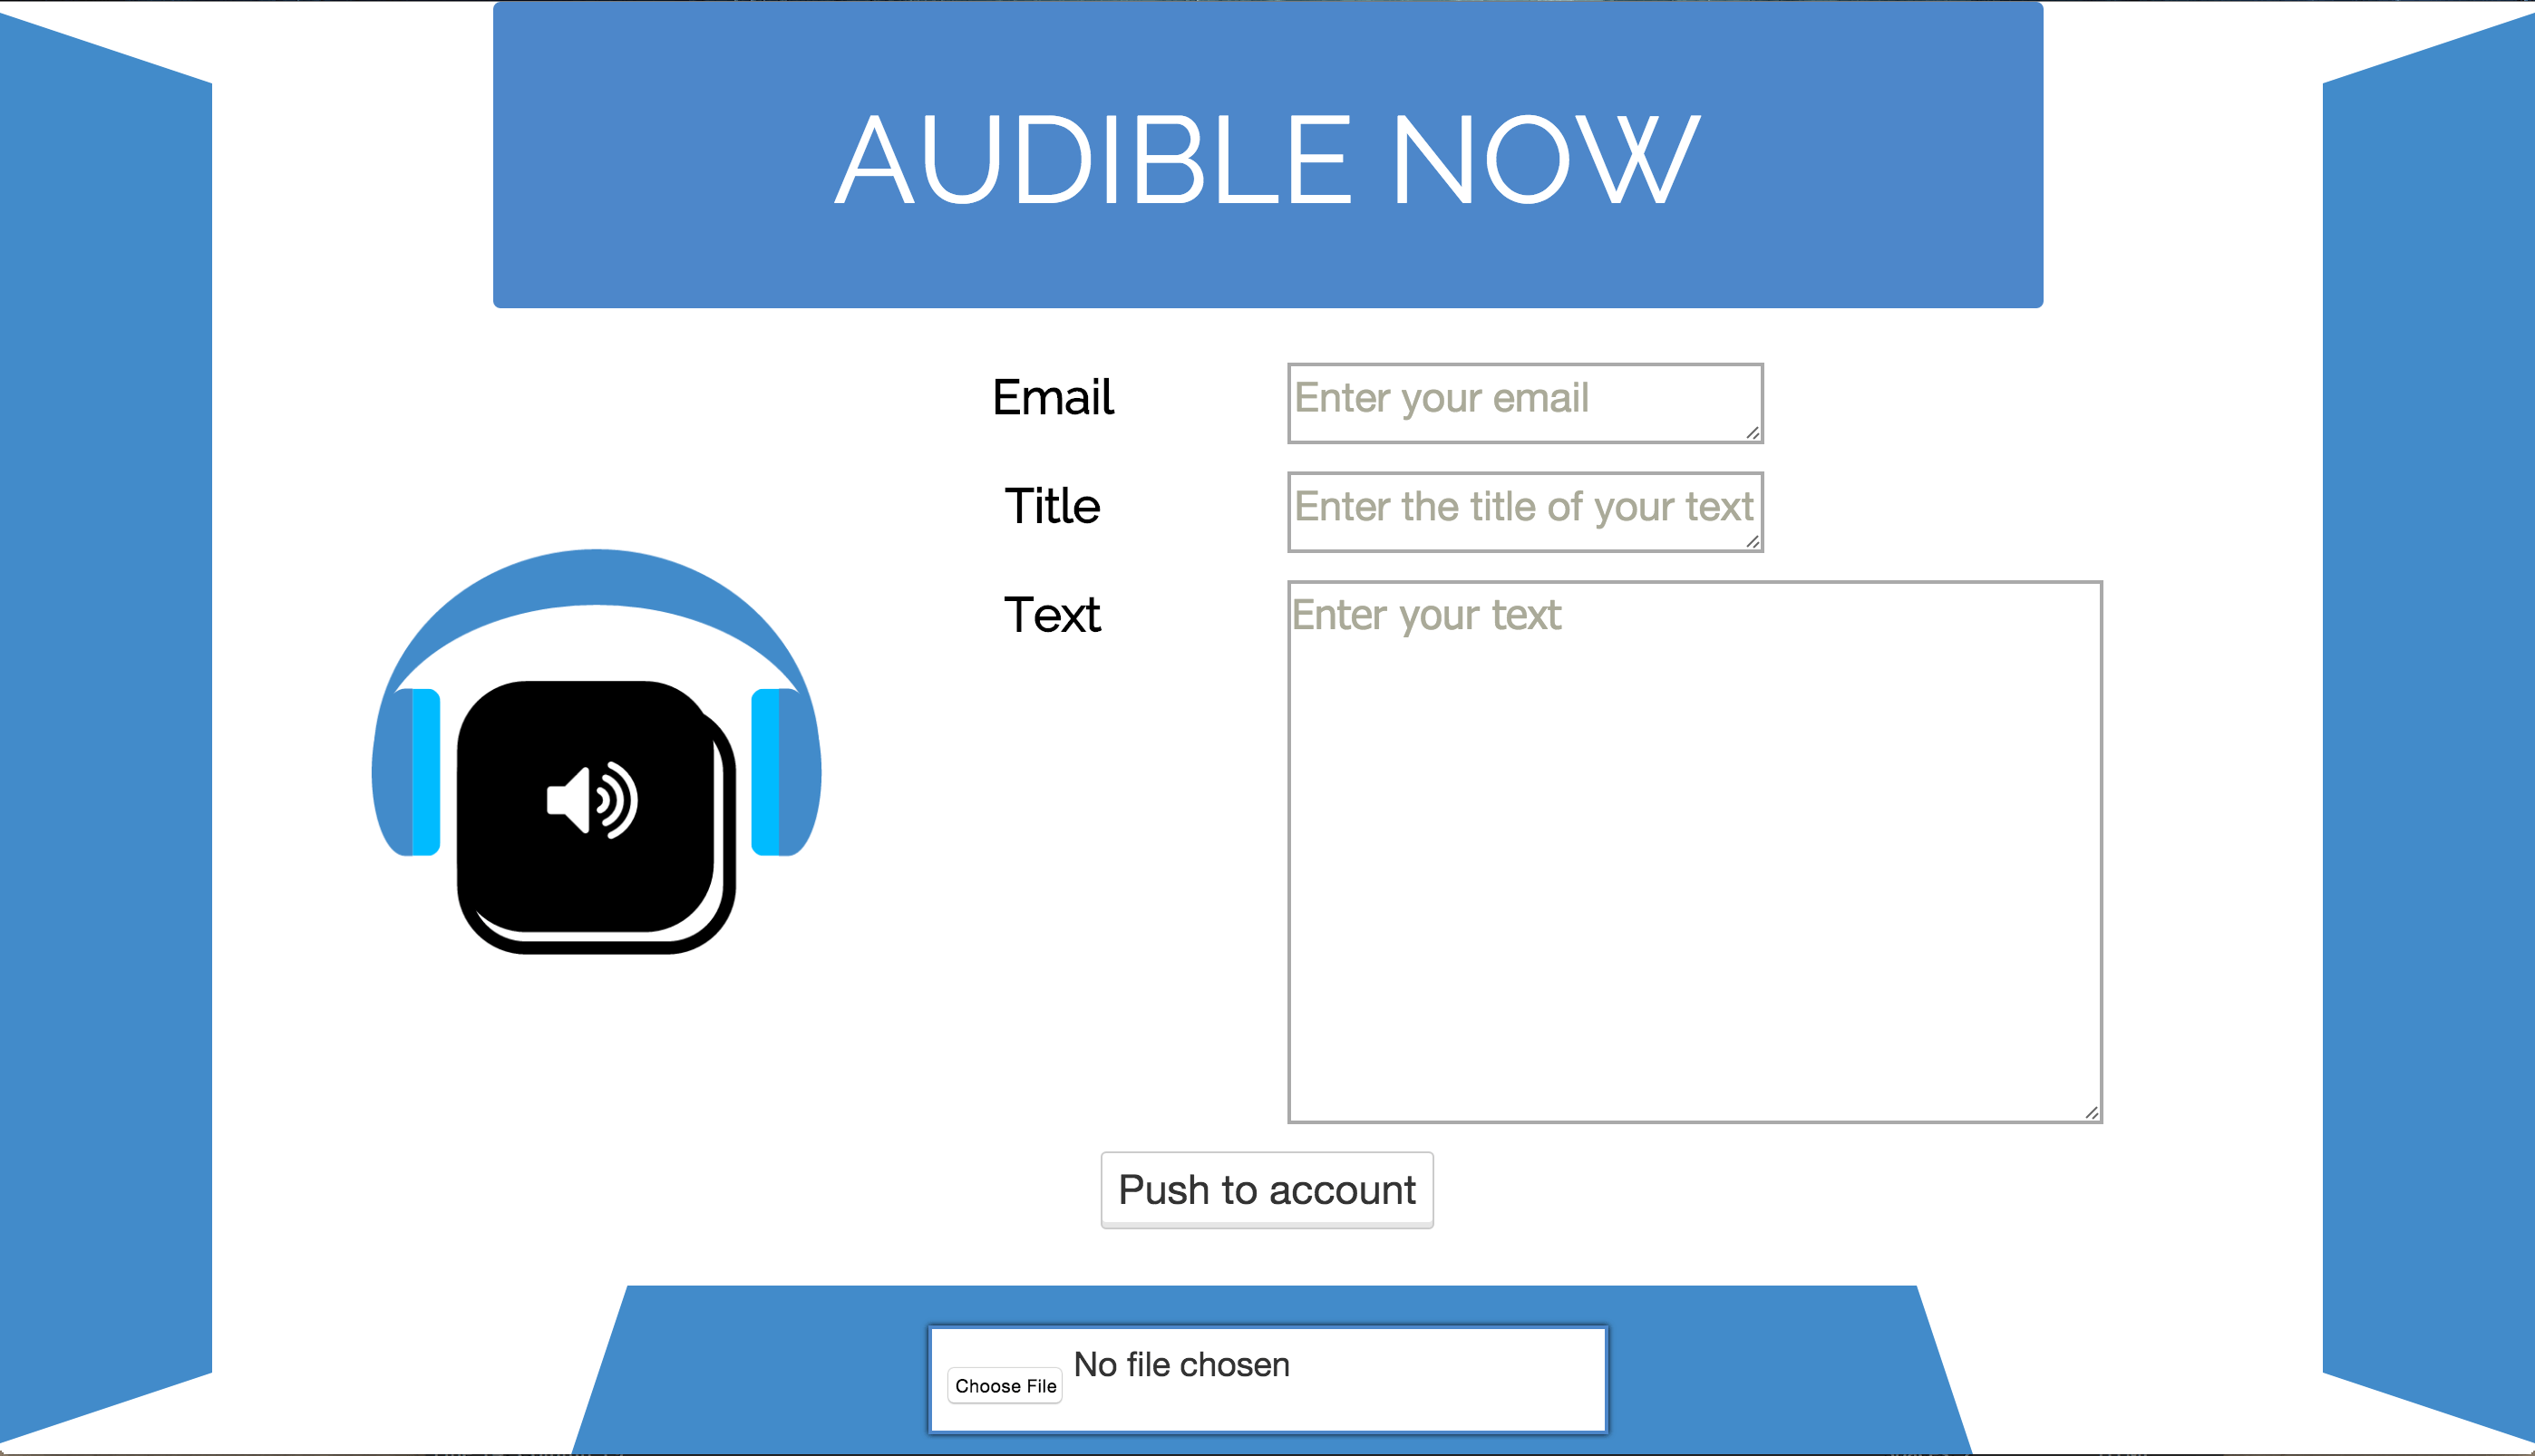 Audible Now